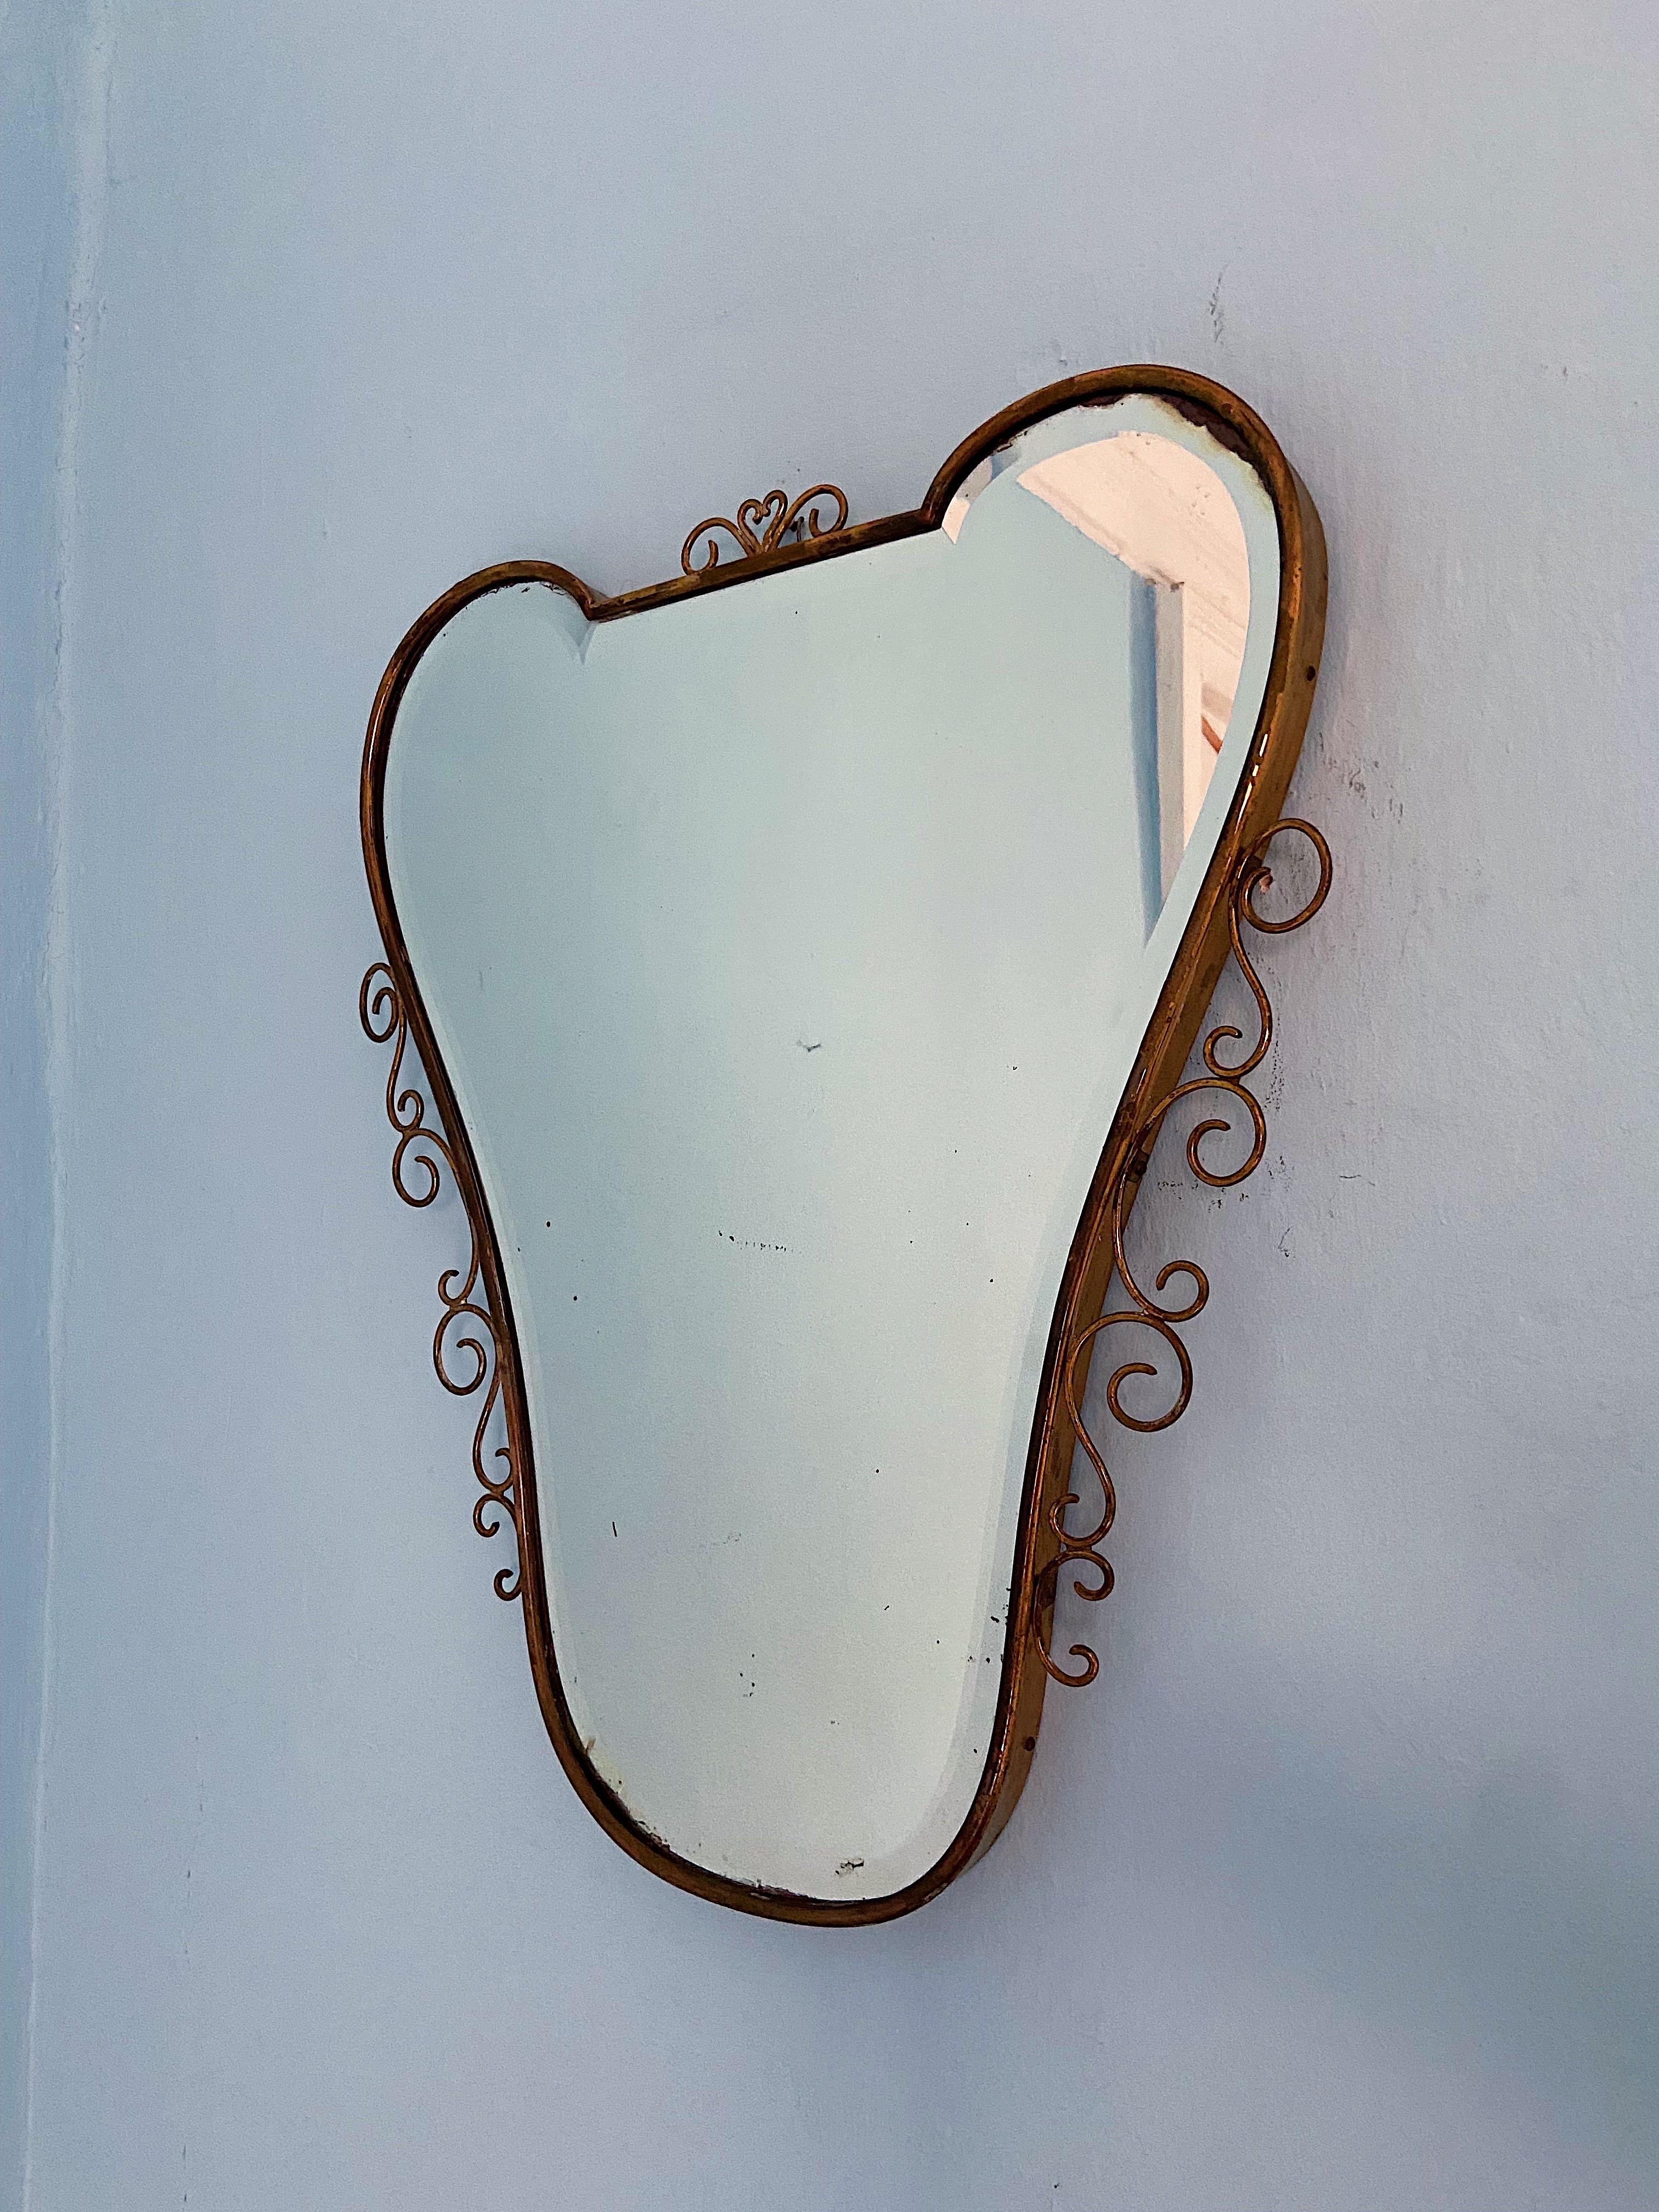 20th Century Mid-Century Modern Vintage Oval Wall Mirror Attributed Gio Ponti, 1950s, Italy For Sale